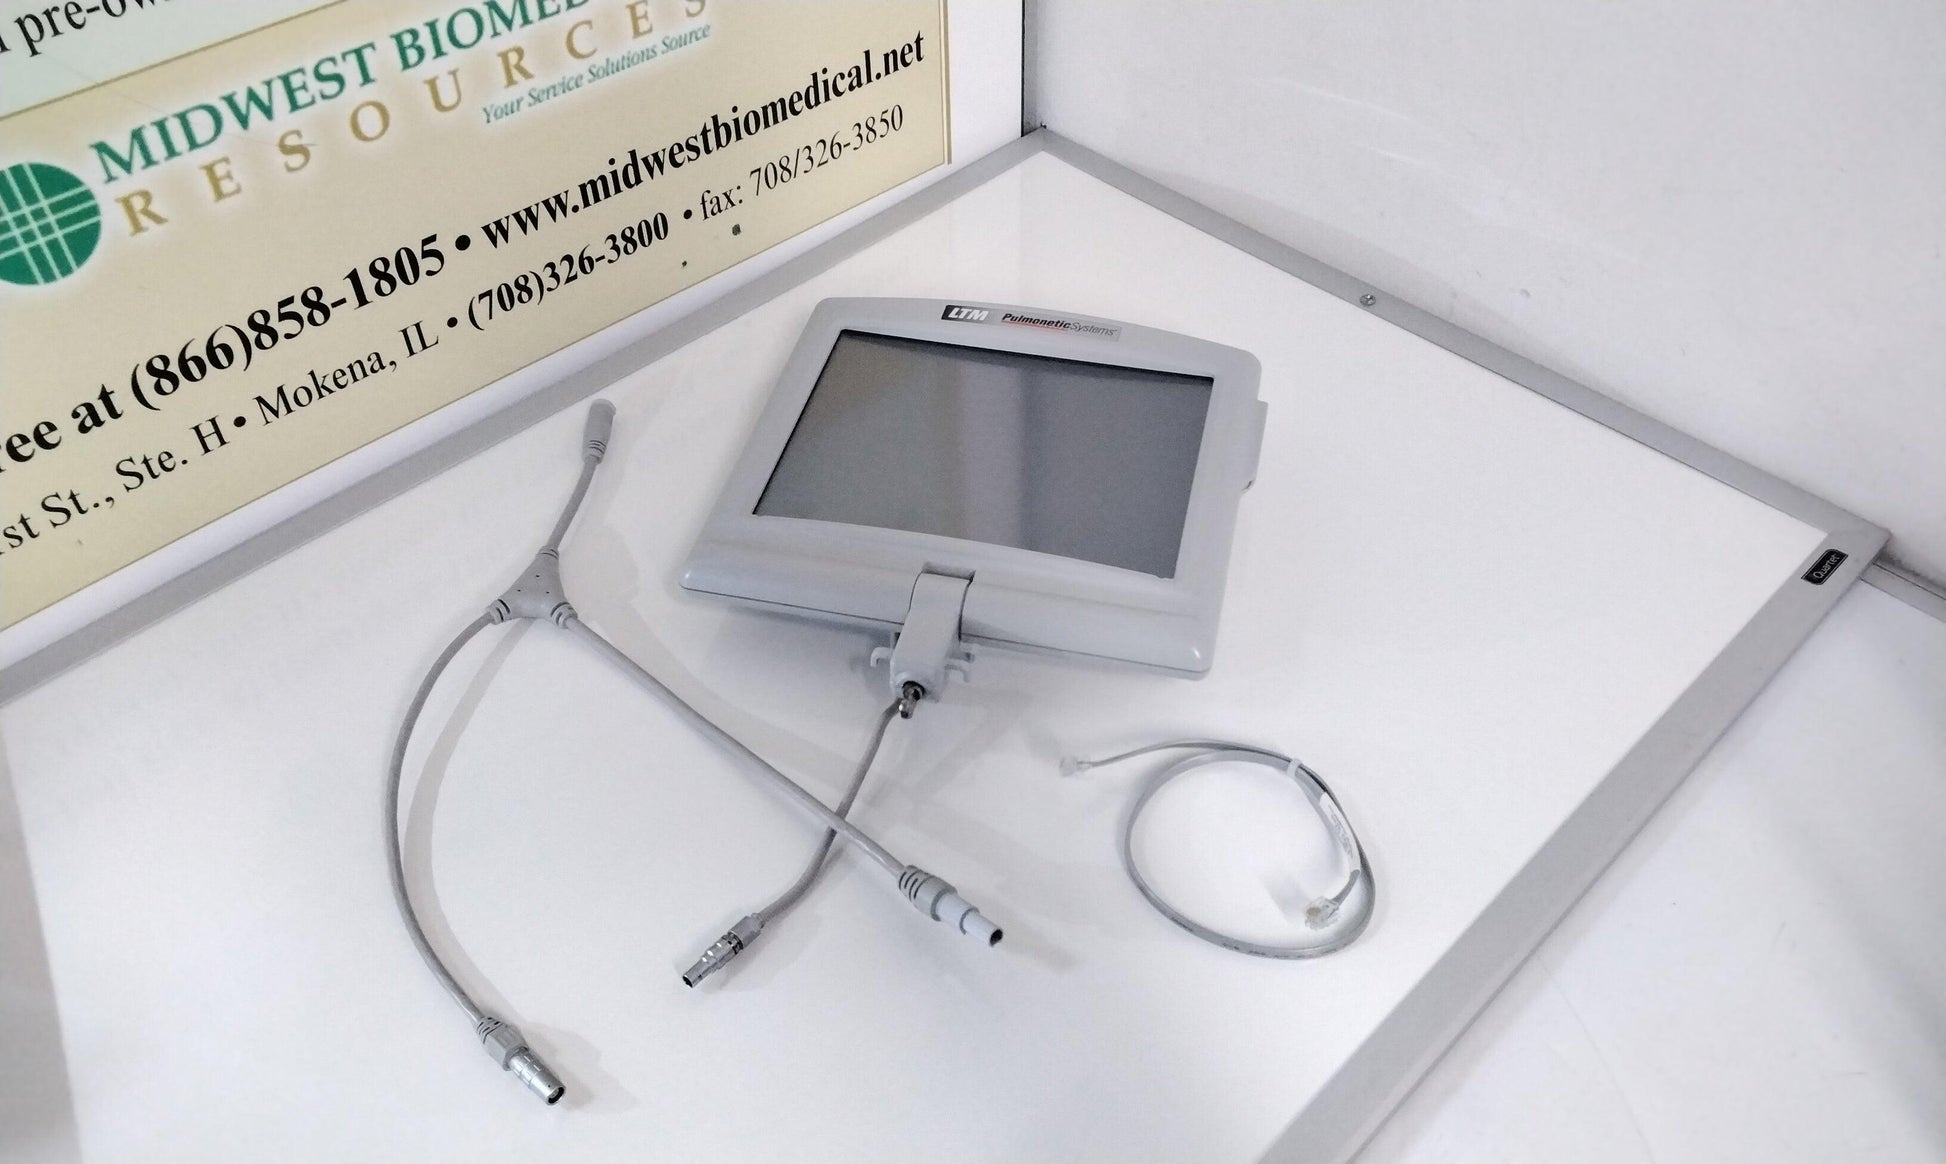 USED Pulmonetic CareFusion Systems LTM Graphics Patient Monitor 17678-001 with Free Shipping & Warranty - MBR Medicals